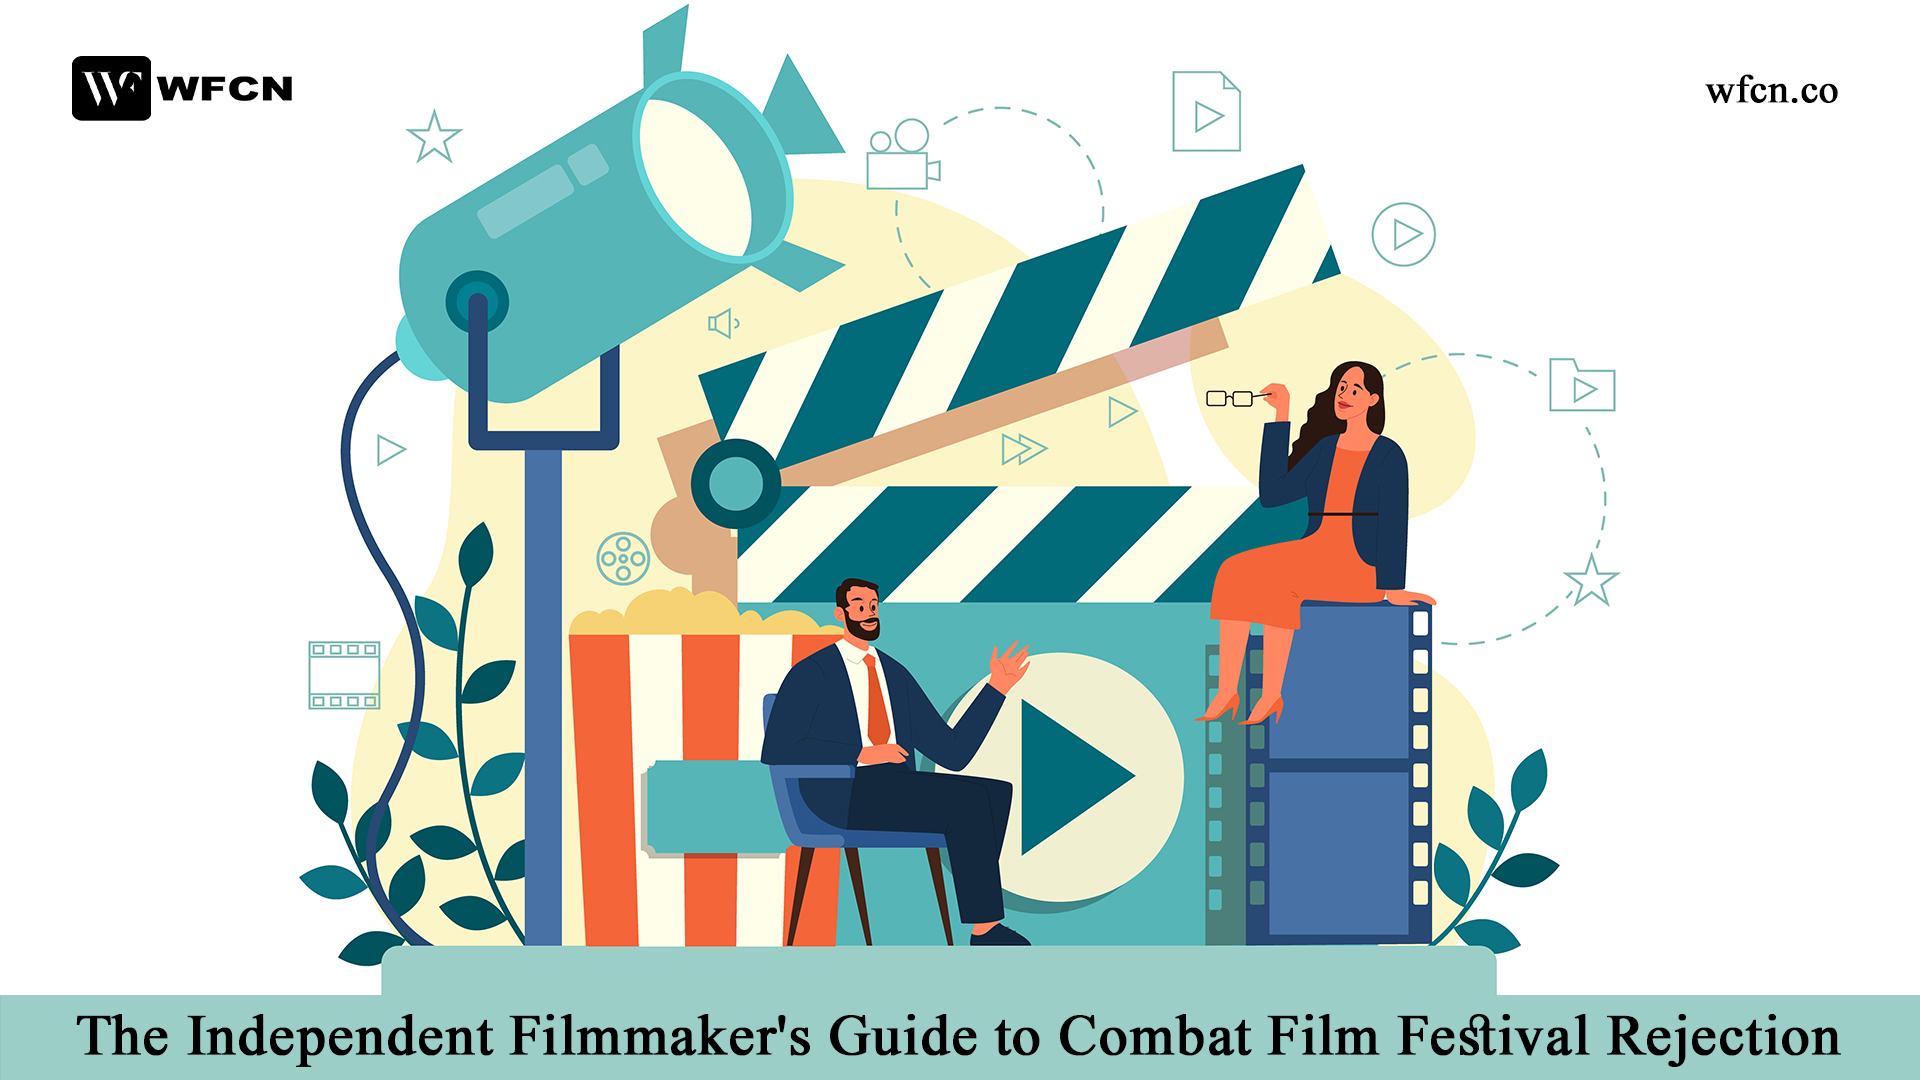 The Independent Filmmaker's Guide to Combat Film Festival Rejection